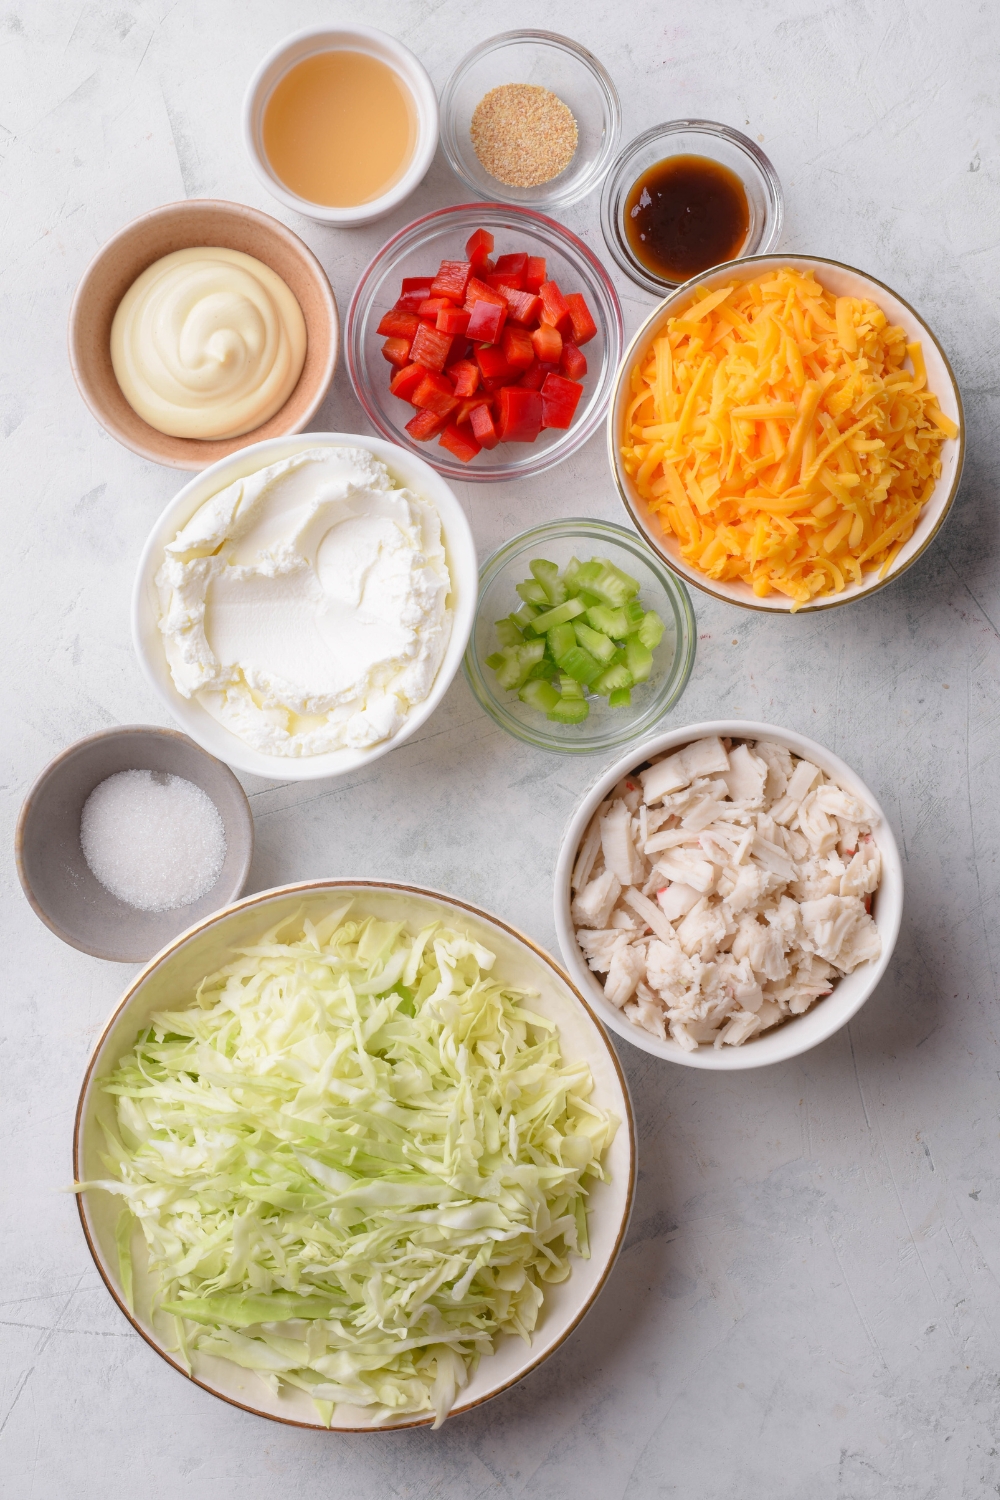 An assortment of ingredients including bowls of shredded cheese, cream cheese, sliced cabbage, crab meat, soy sauce, diced red peppers, diced celery, mayonnaise, and seasonings, on a grey counter.